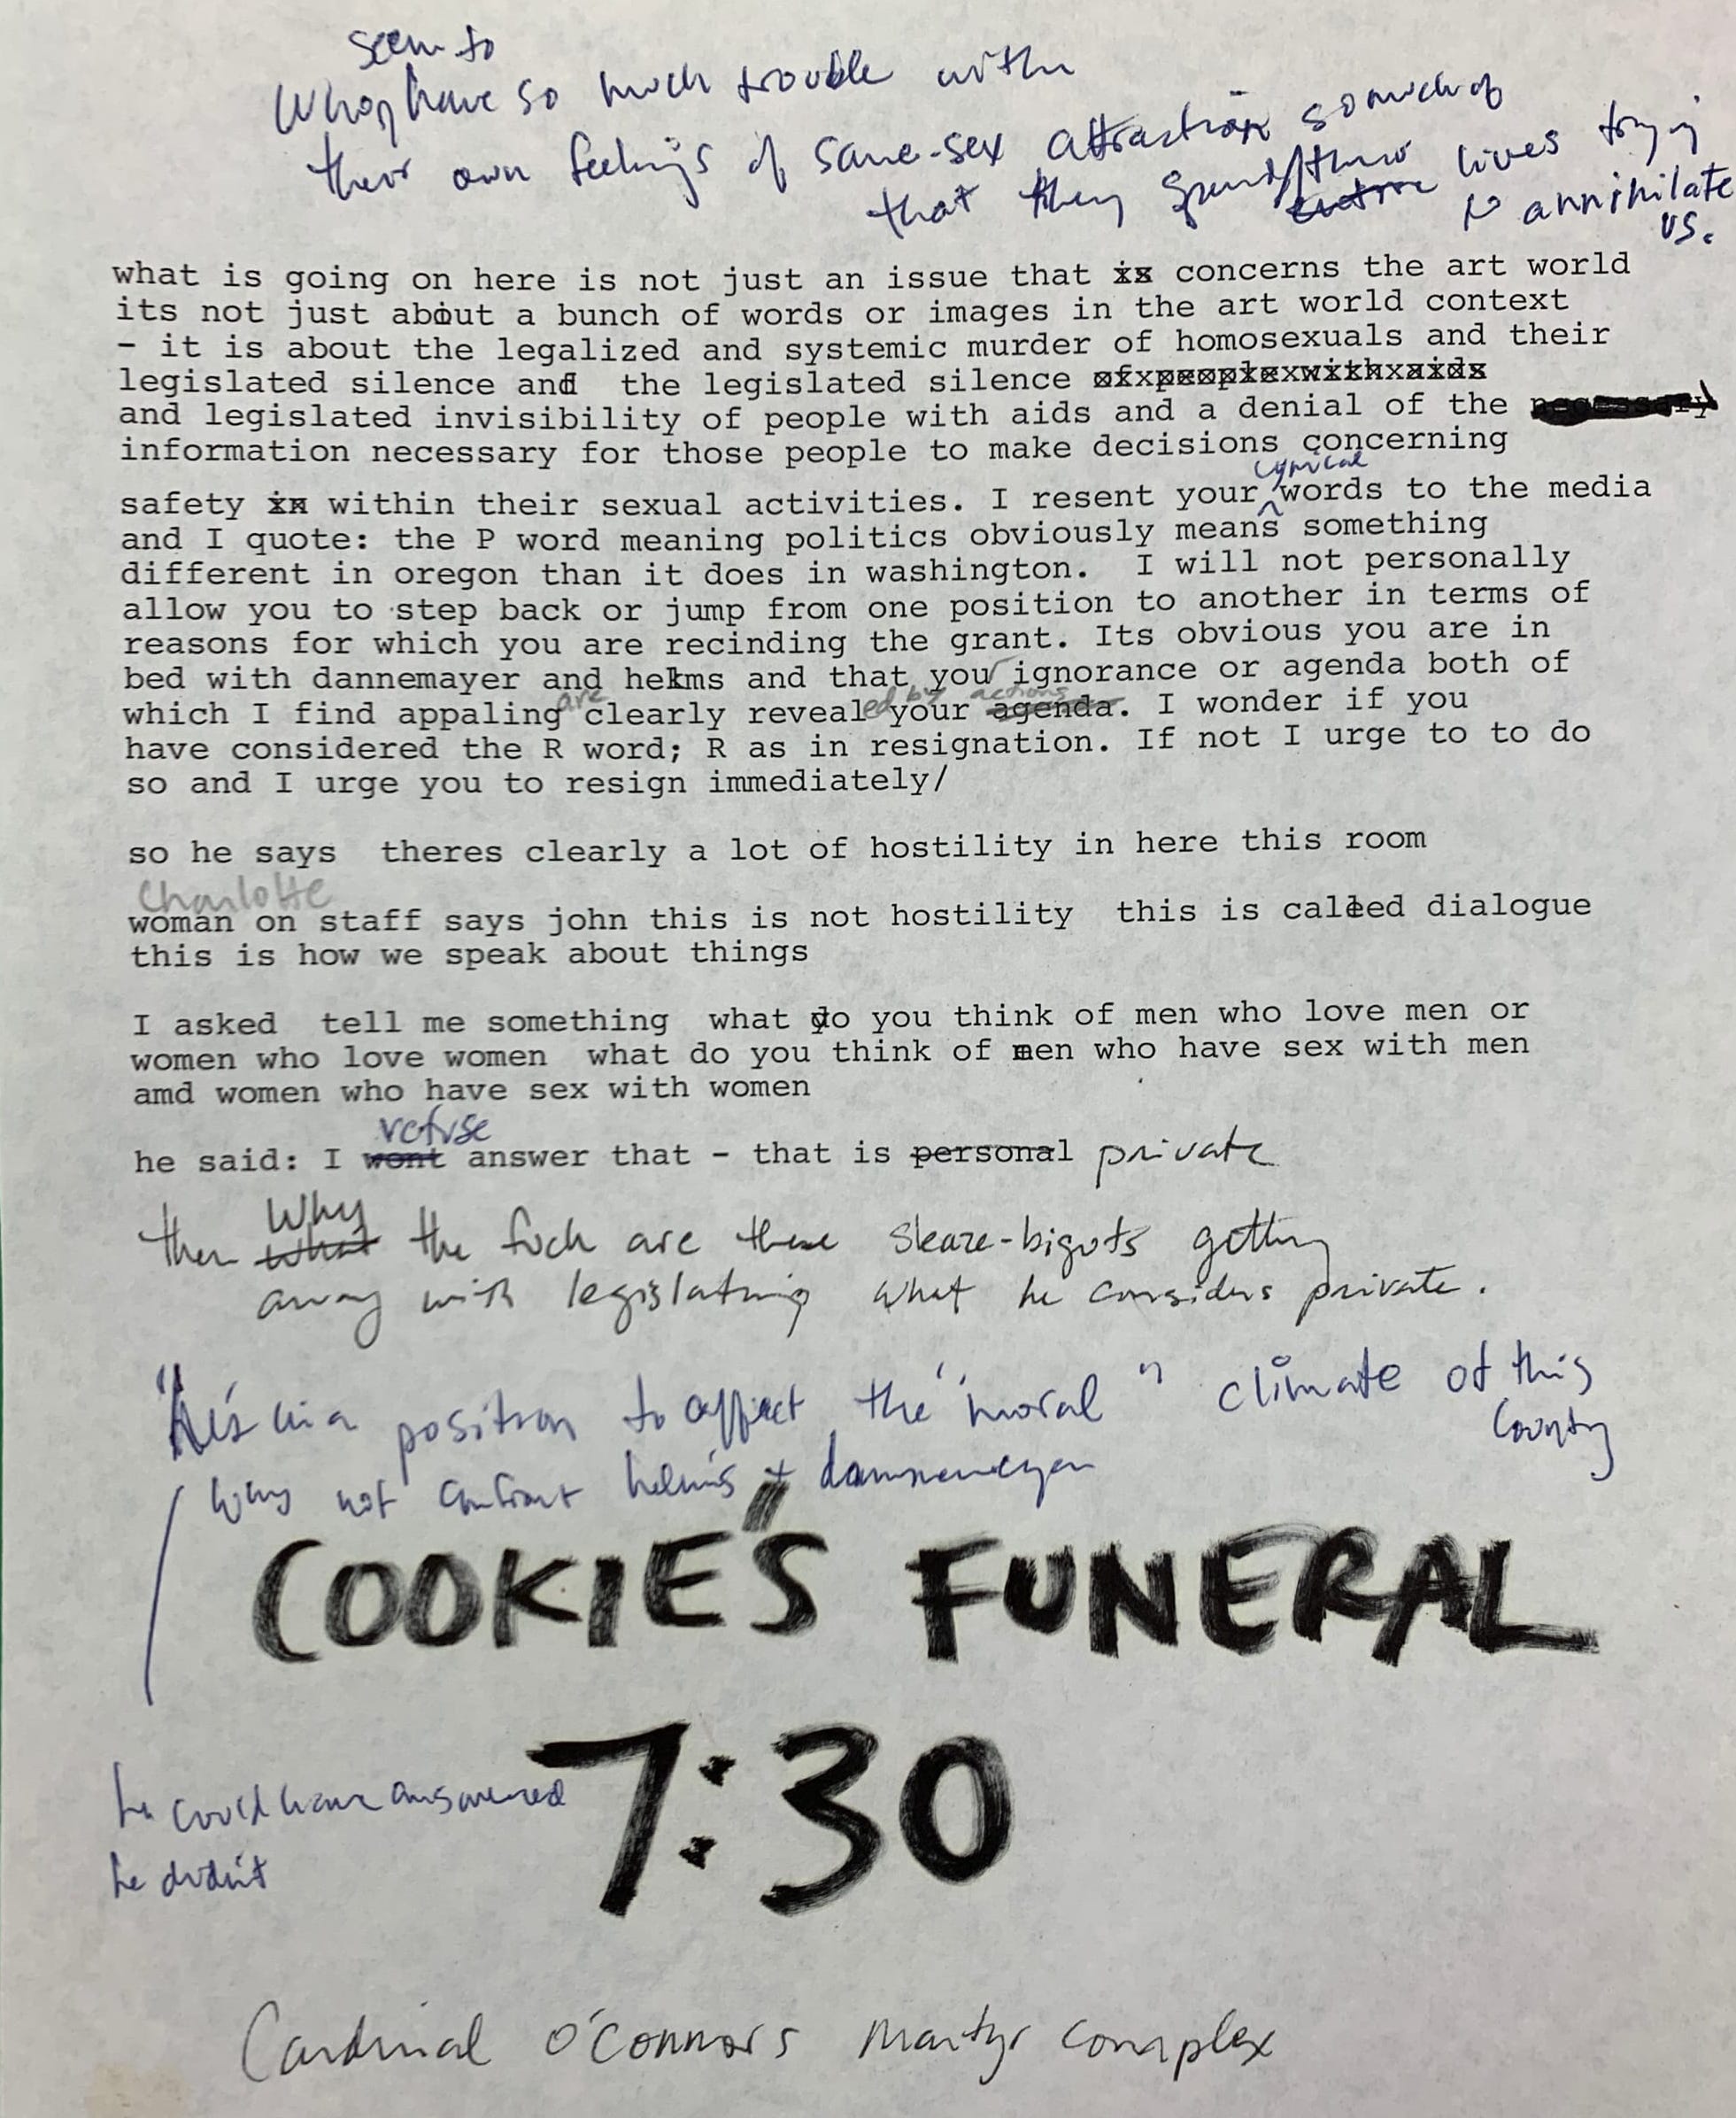 David Wojnarowicz journal after meeting NEA Chairman John Frohnmayer September 15, 1989 punctuated with "Cookie's Funeral 7:30"